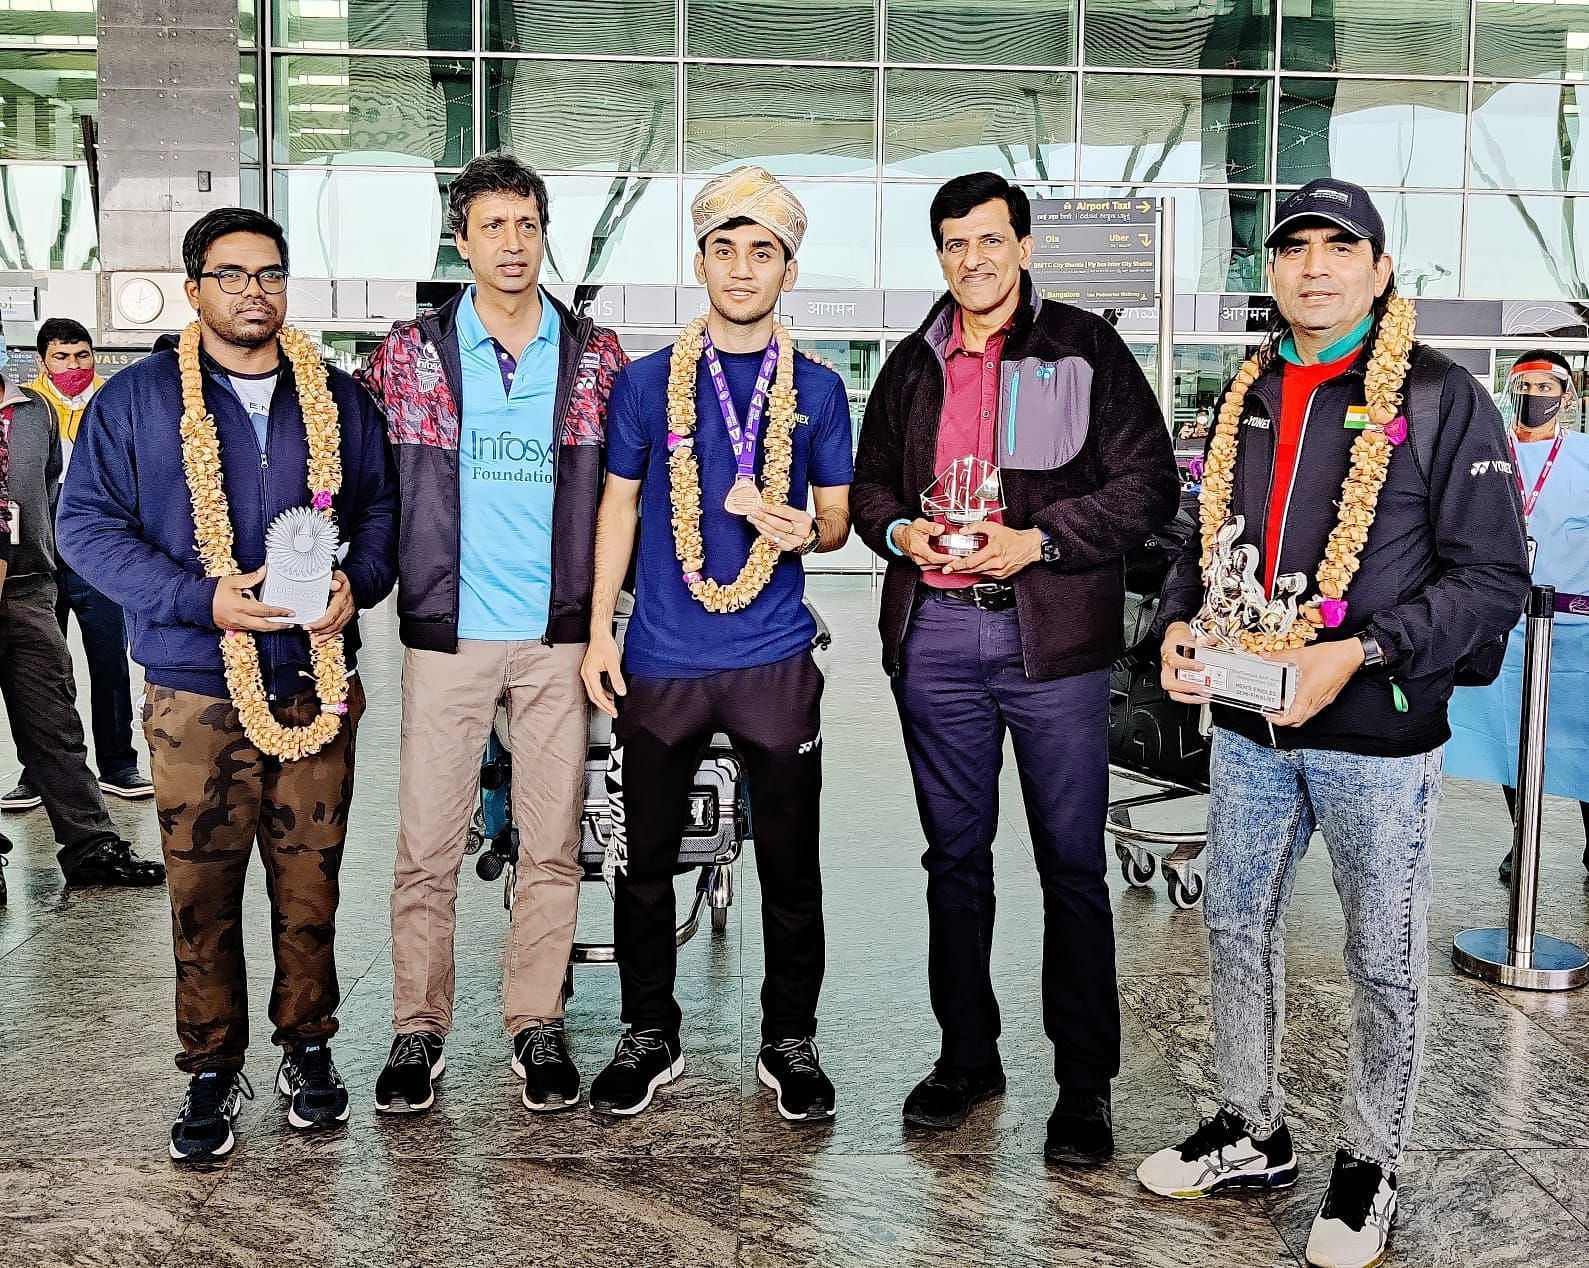 Lakshya Sen (C) was given a warm welcome by Vimal Kumar (2nd from R) at the Bengaluru Airport on Tuesday. Physio Abdul Wahid (extreme left) and DK Sen (extreme right) are also seen in the picture. (Image courtesy: DK Sen)